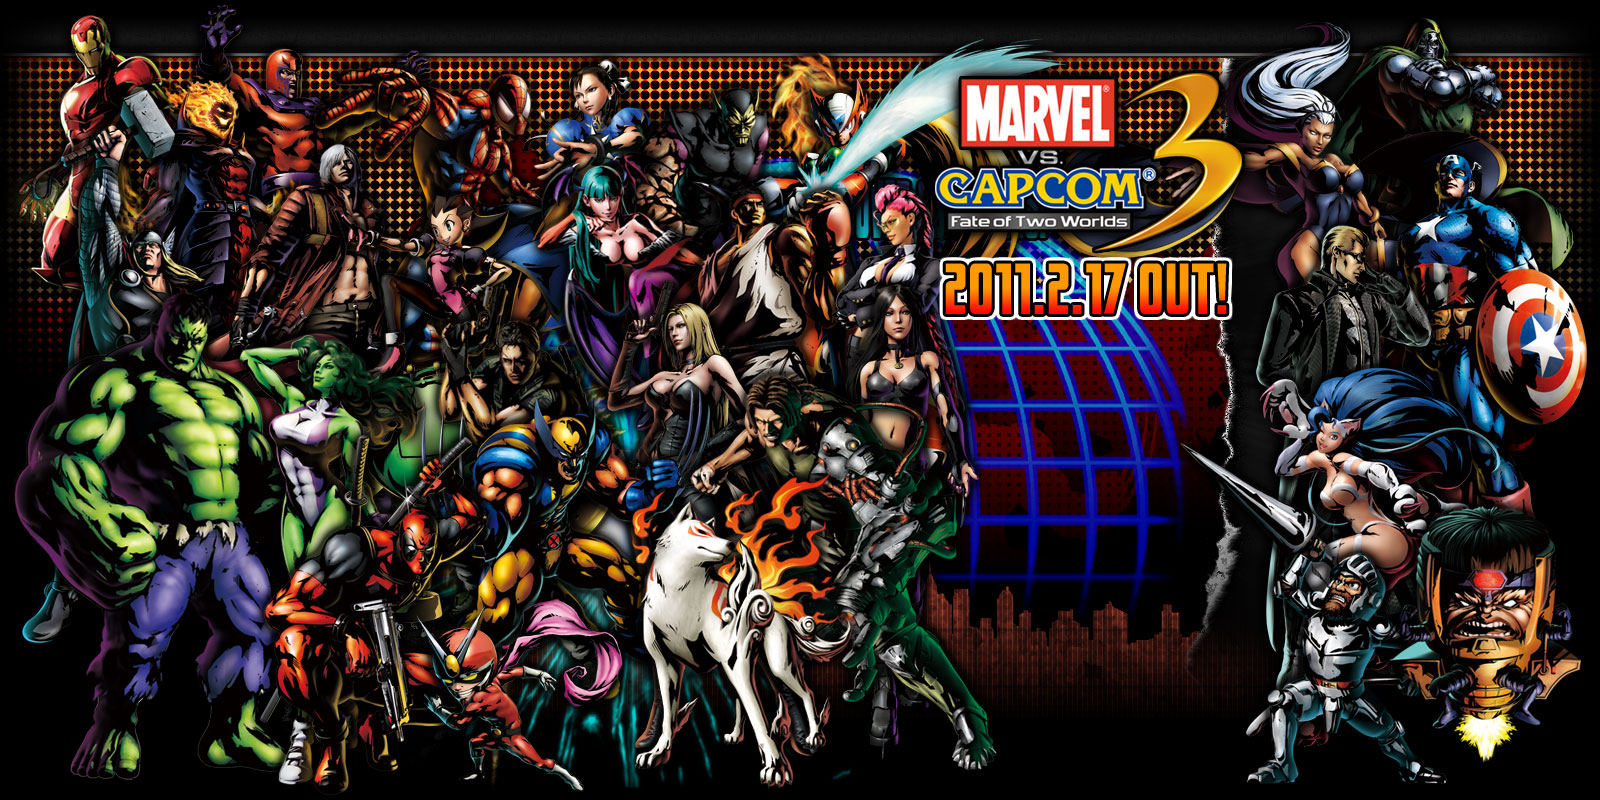 Marvel vs. Capcom 3: Fate of Two Worlds, Street Fighter Wiki